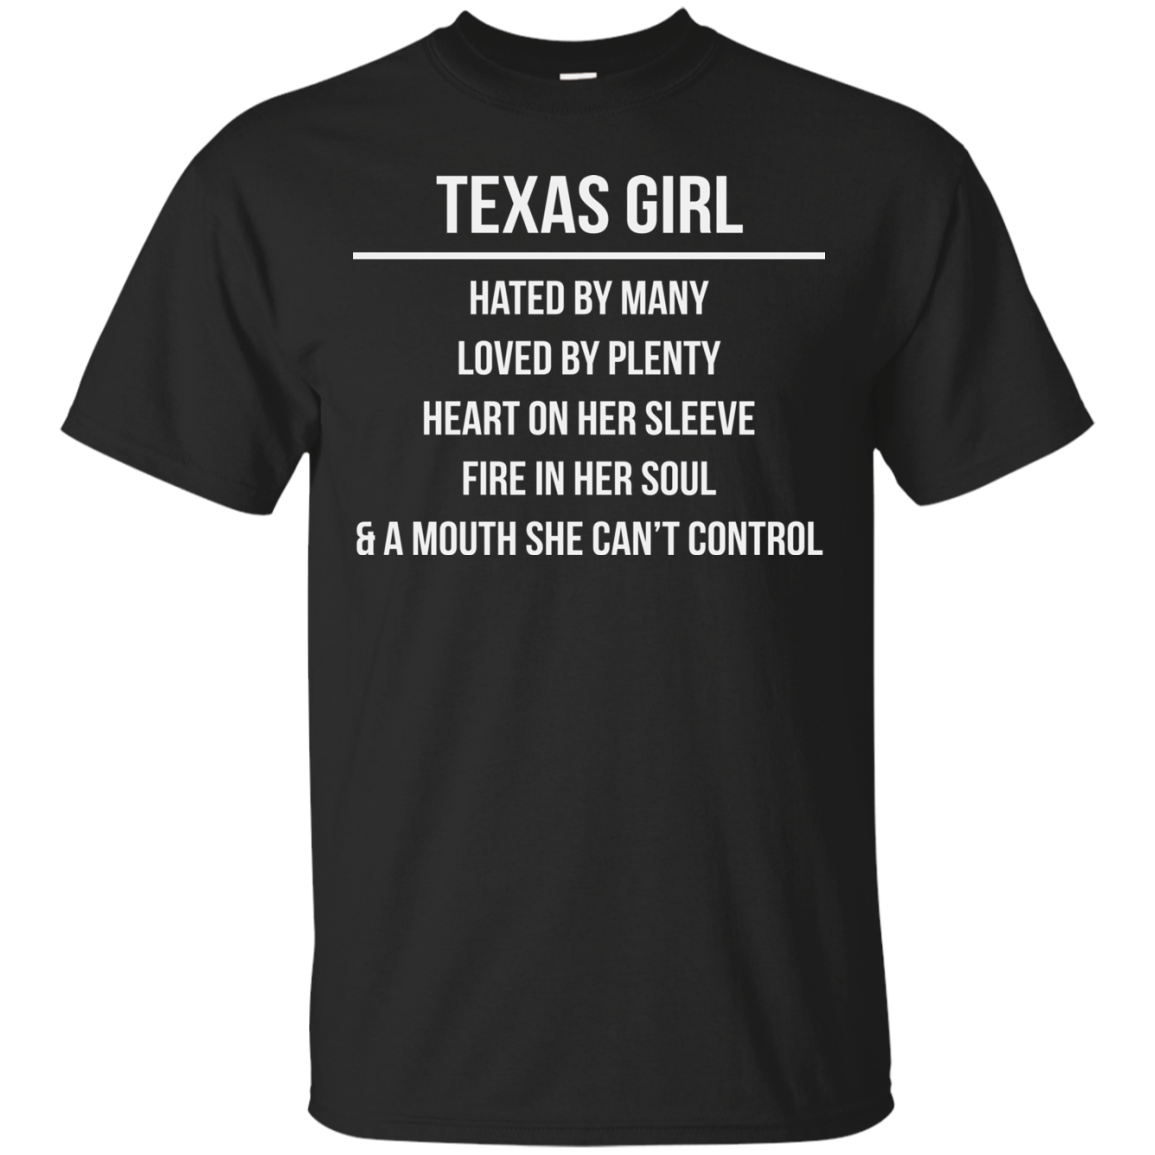 Texas girl hated by many loved by plenty heart on her sleeve shirt, tank